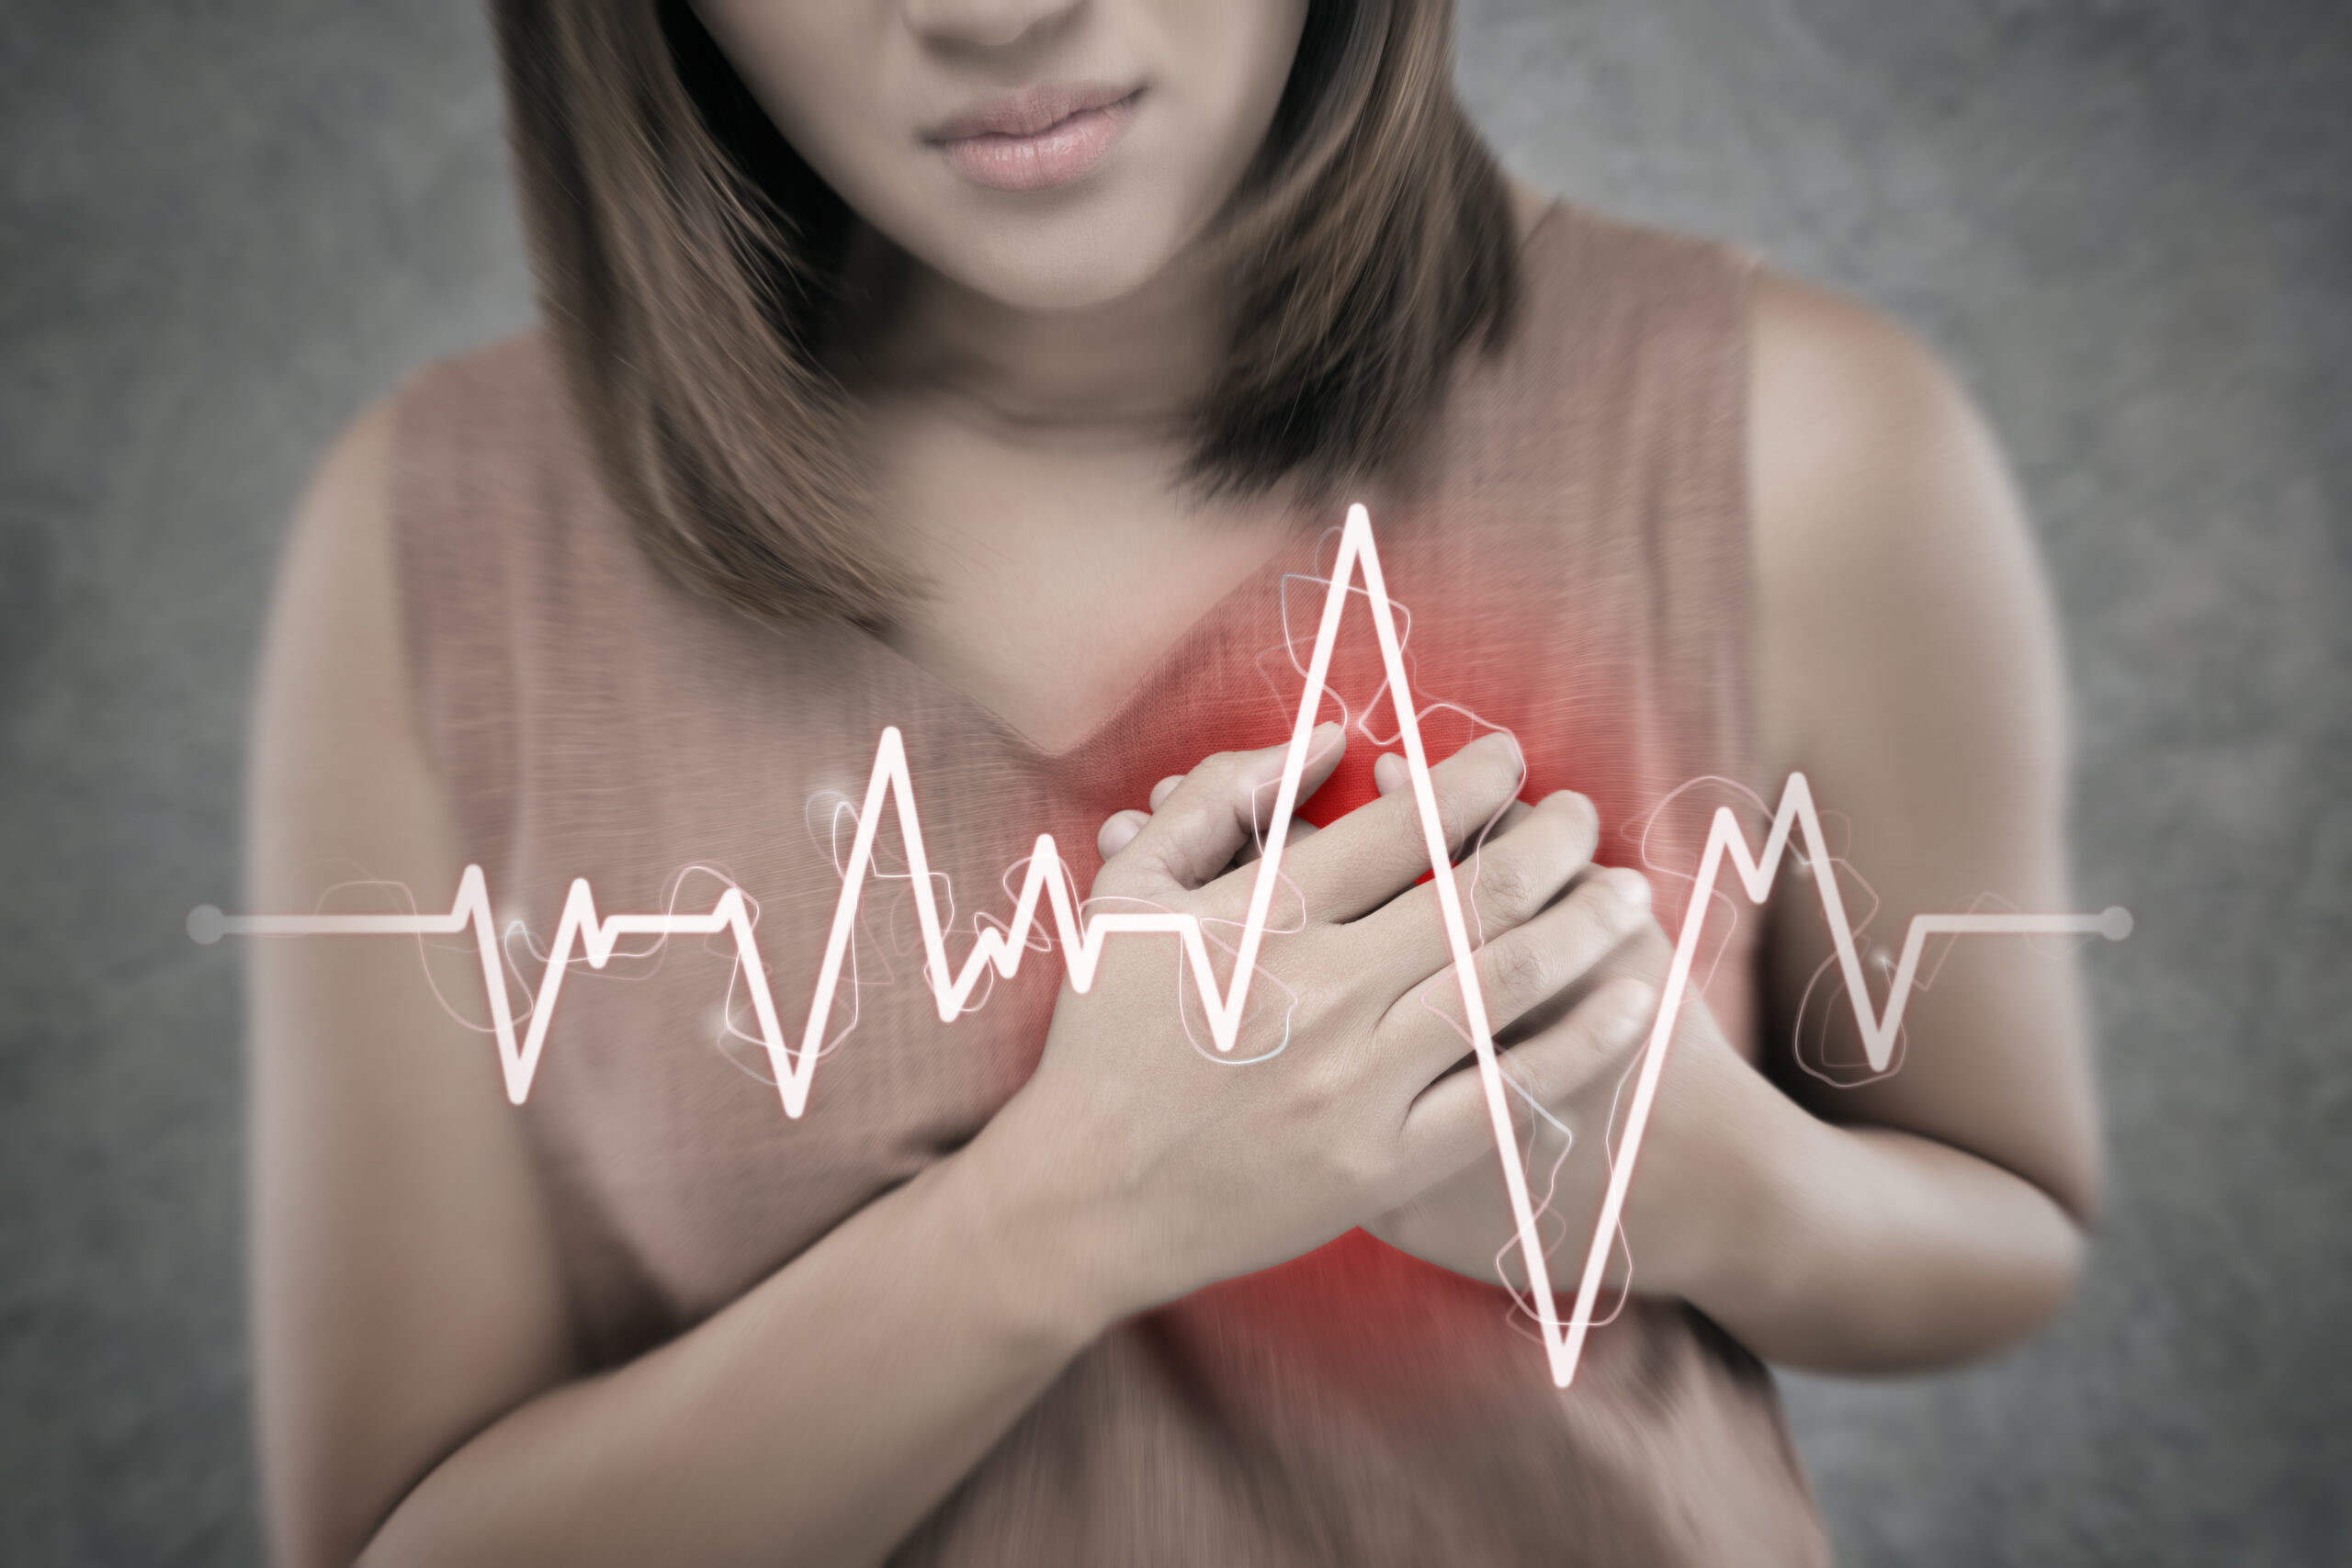 Afib more common and dangerous in younger people than previously thought, study finds